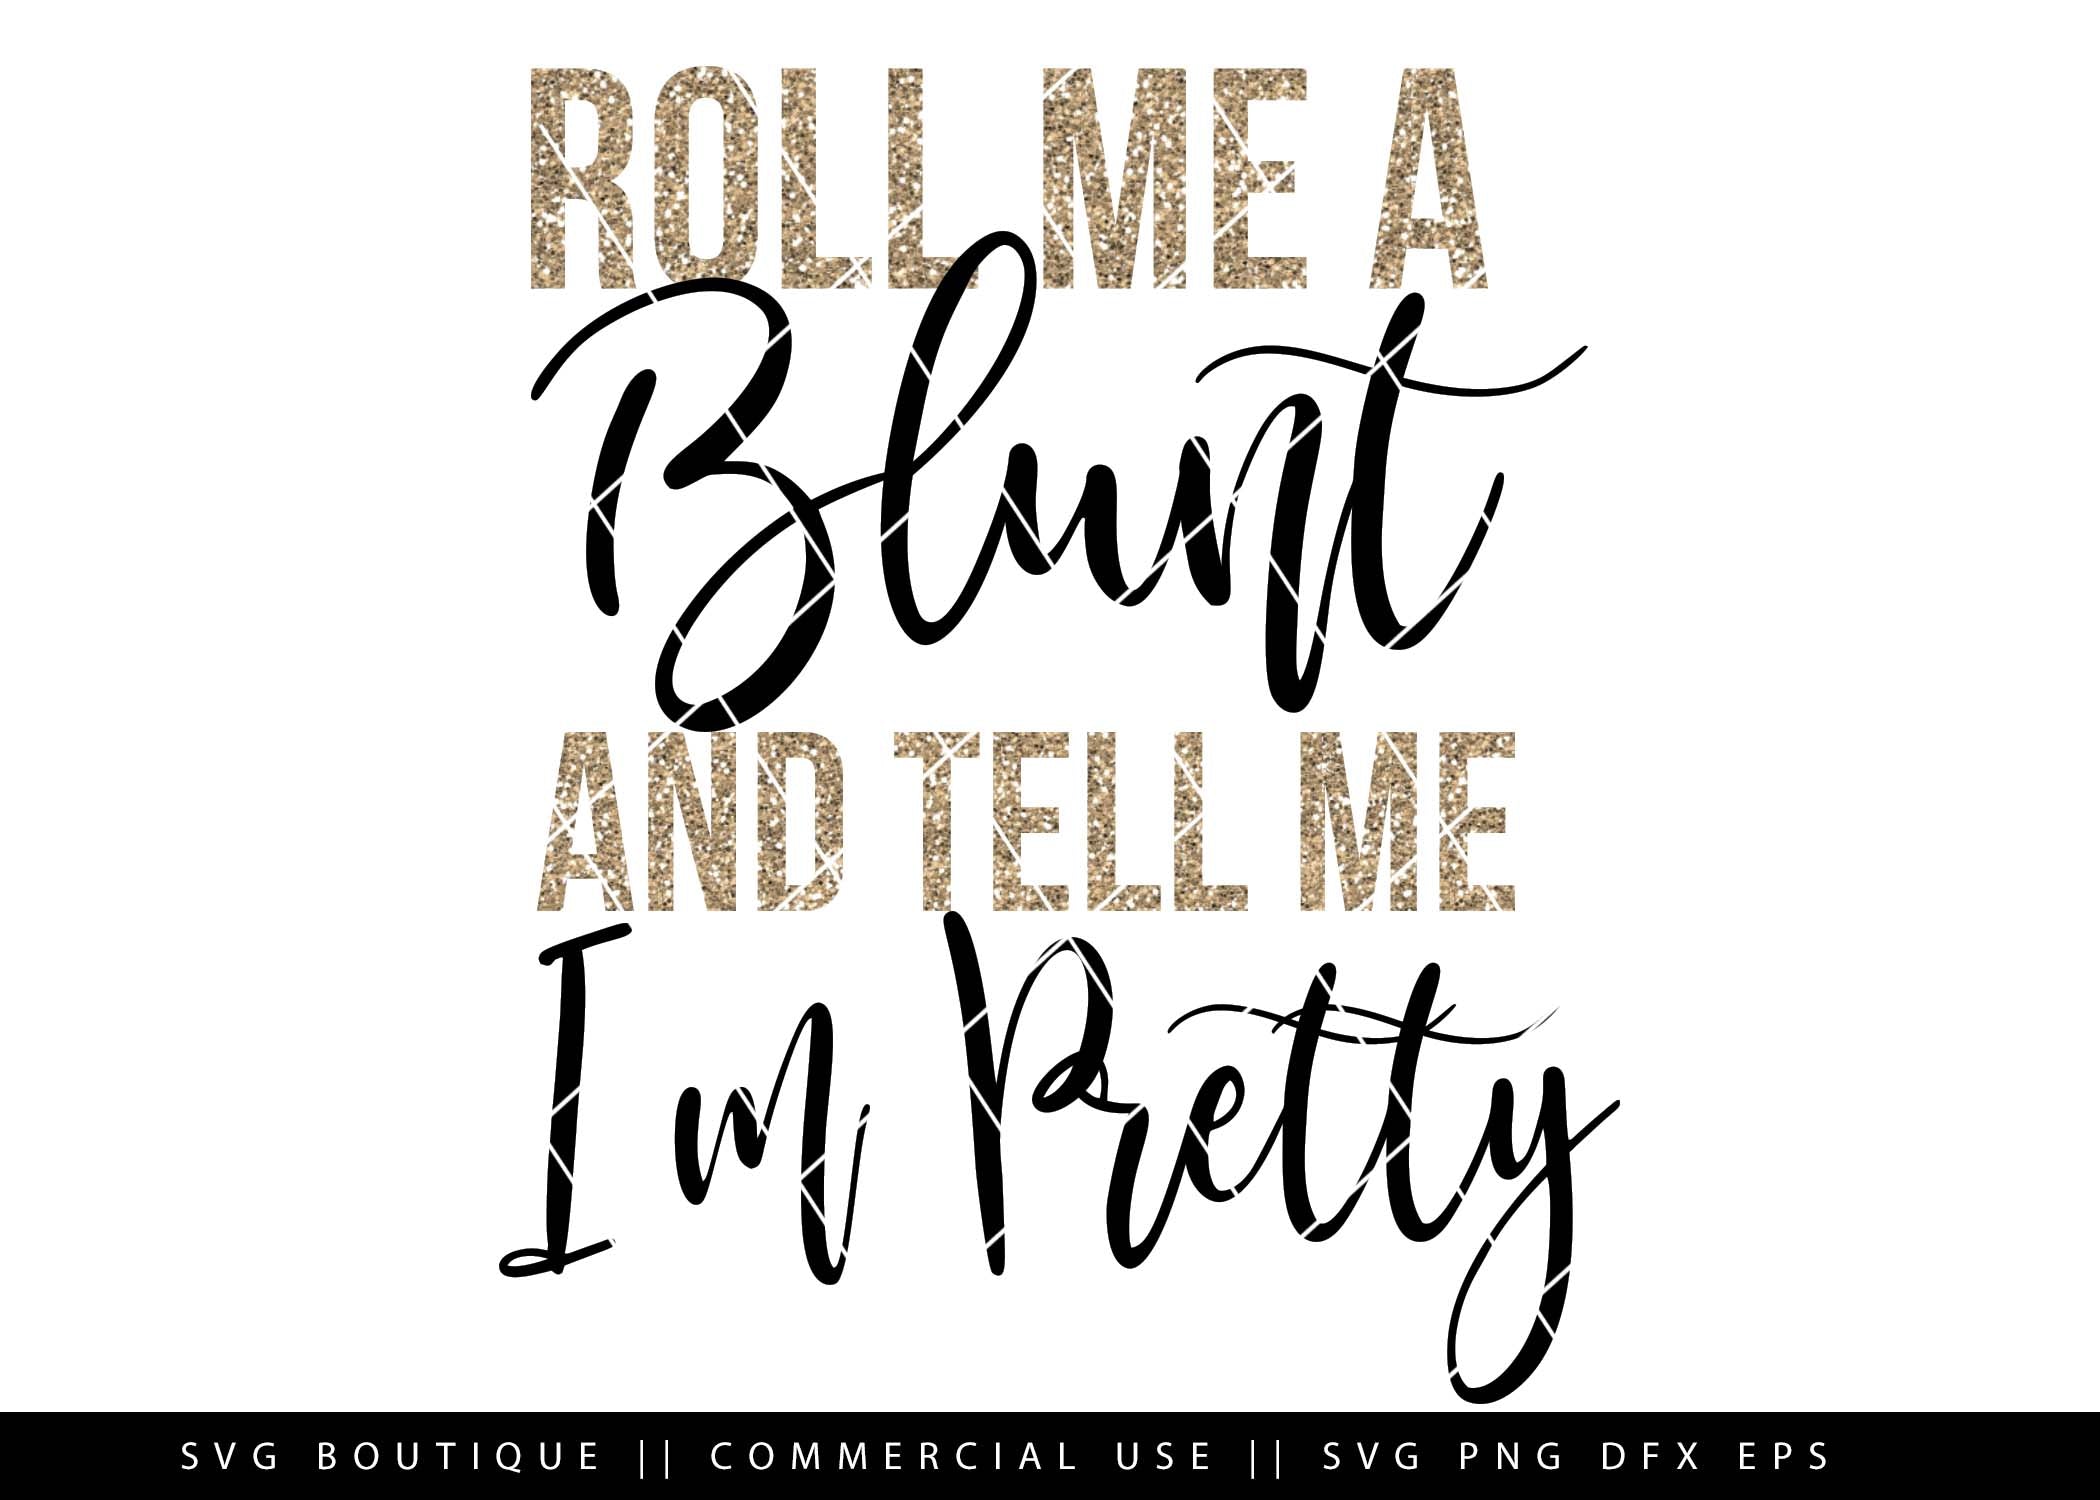 Download Roll Me A Blunt And Tell Me I M Pretty Weed Dope Svg Files Cut Fil Svg Boutique SVG, PNG, EPS, DXF File